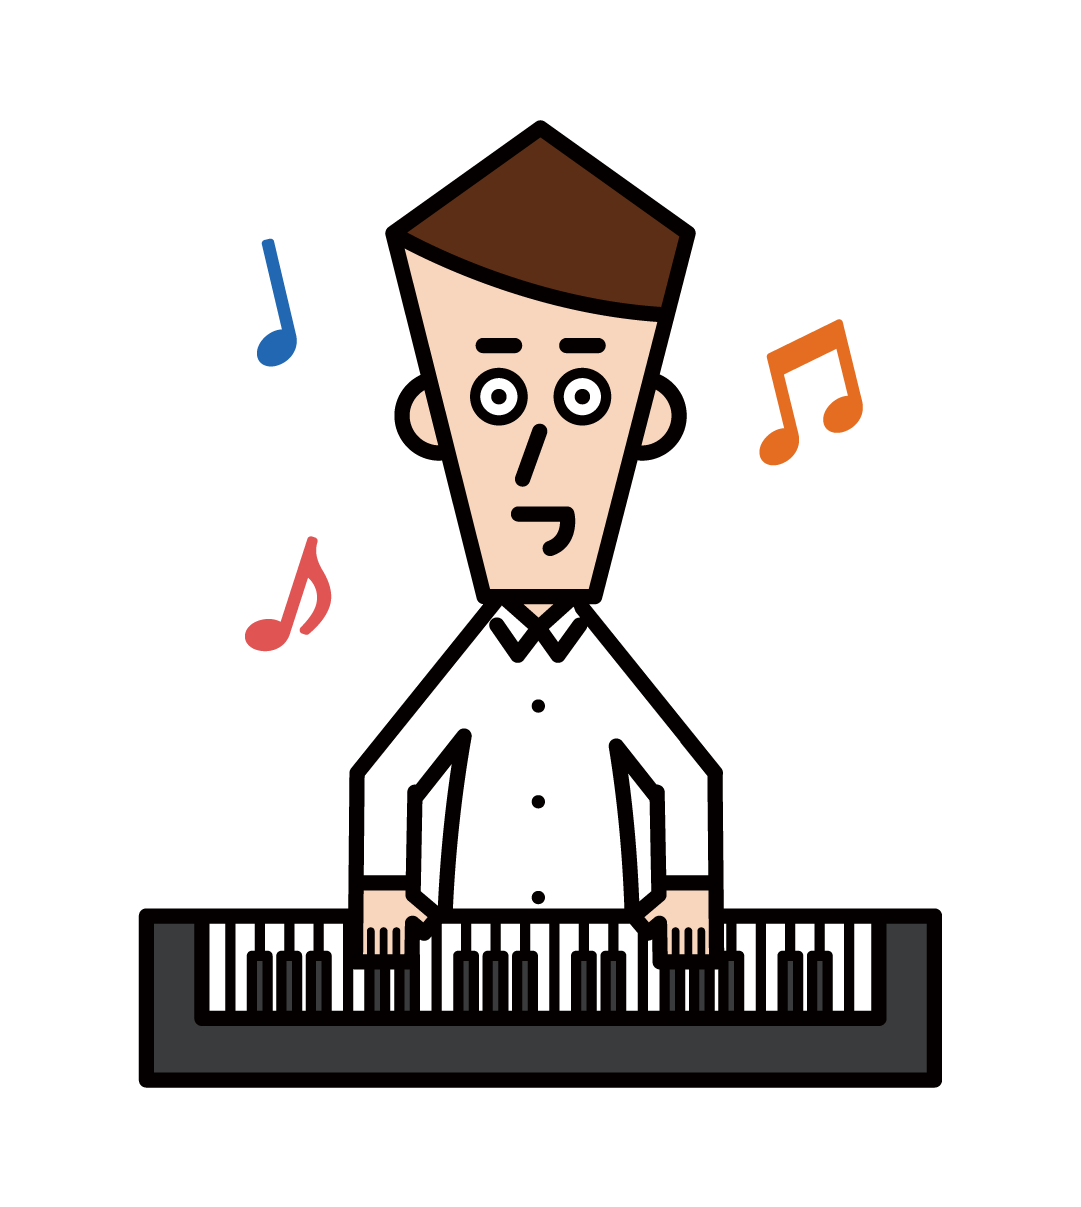 Illustration of a man playing a keyboard synthesizer